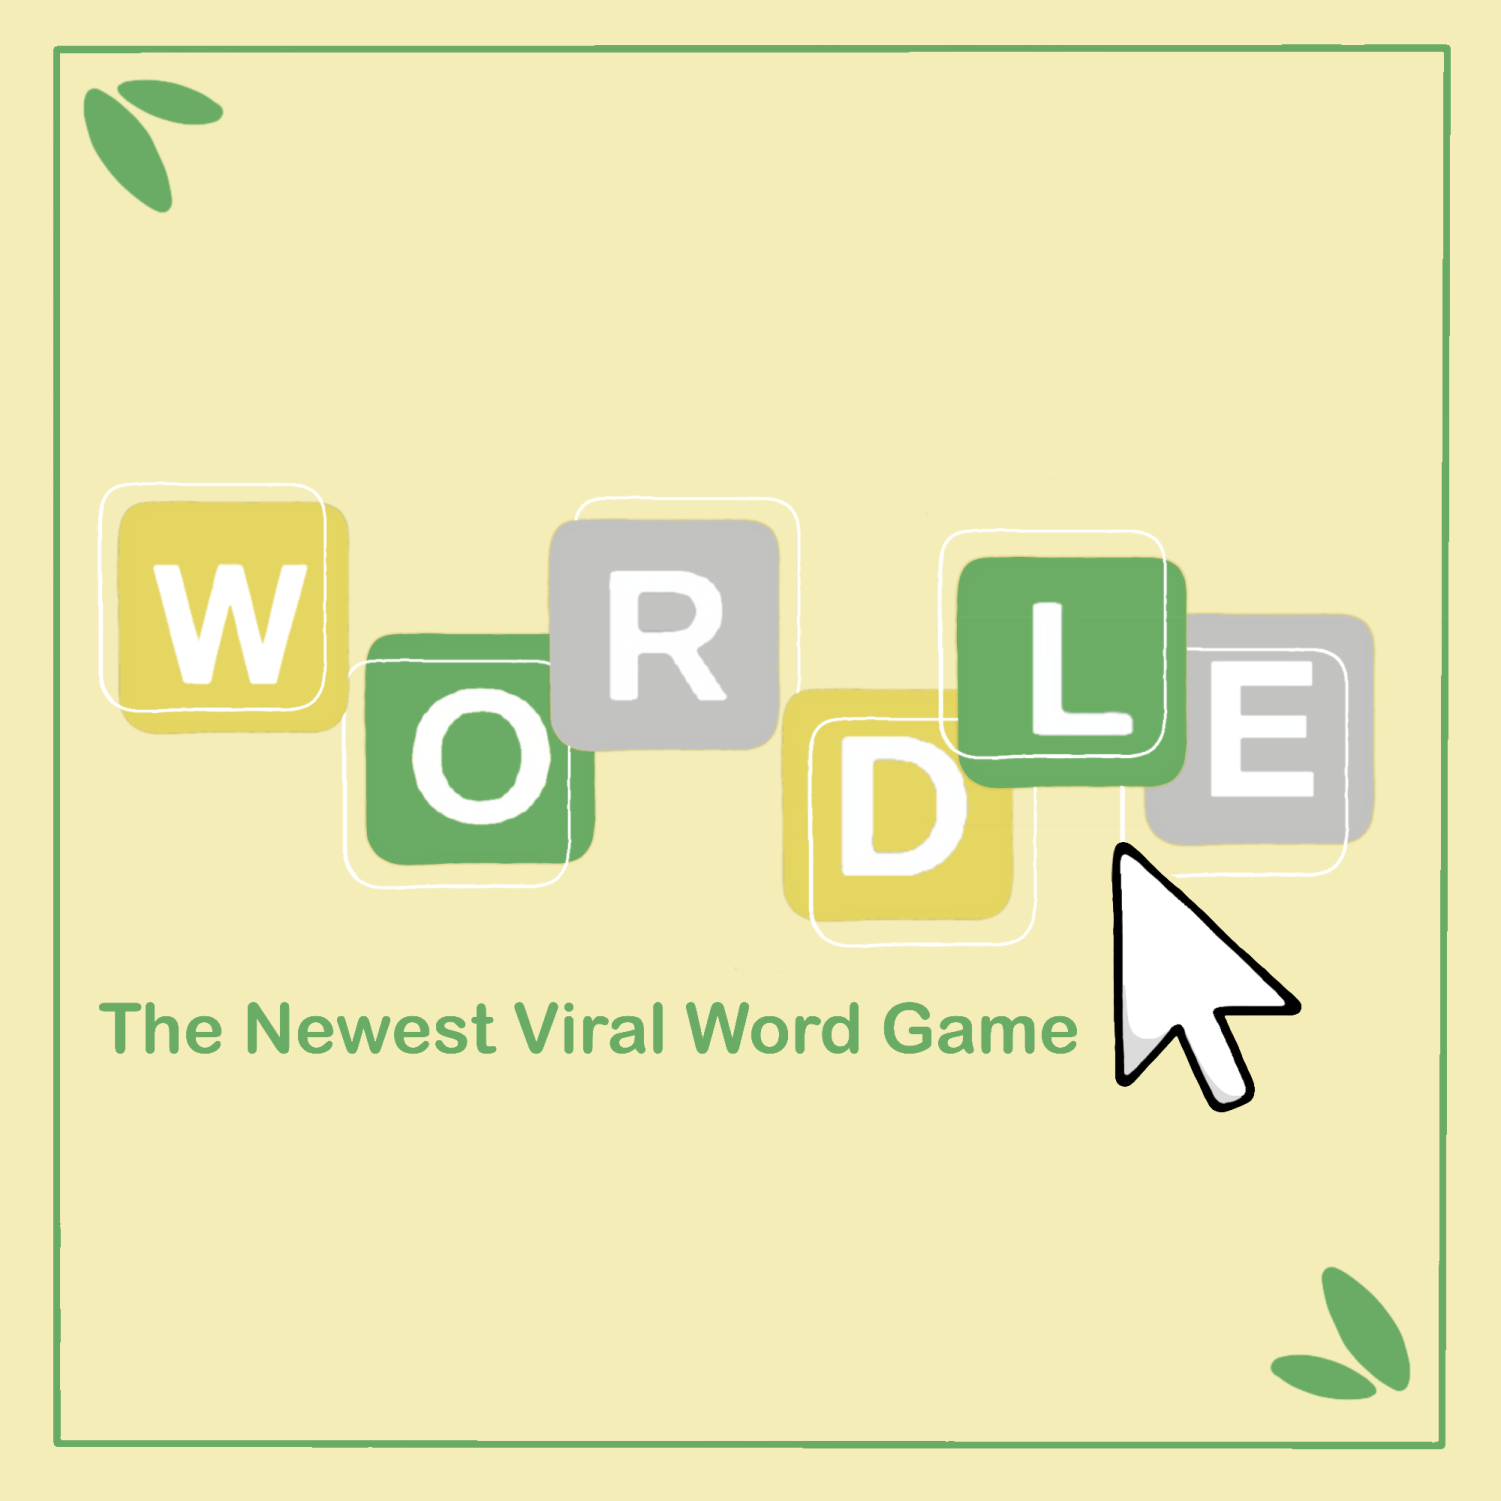 What is Wordle? The new viral word game delighting the internet, Games